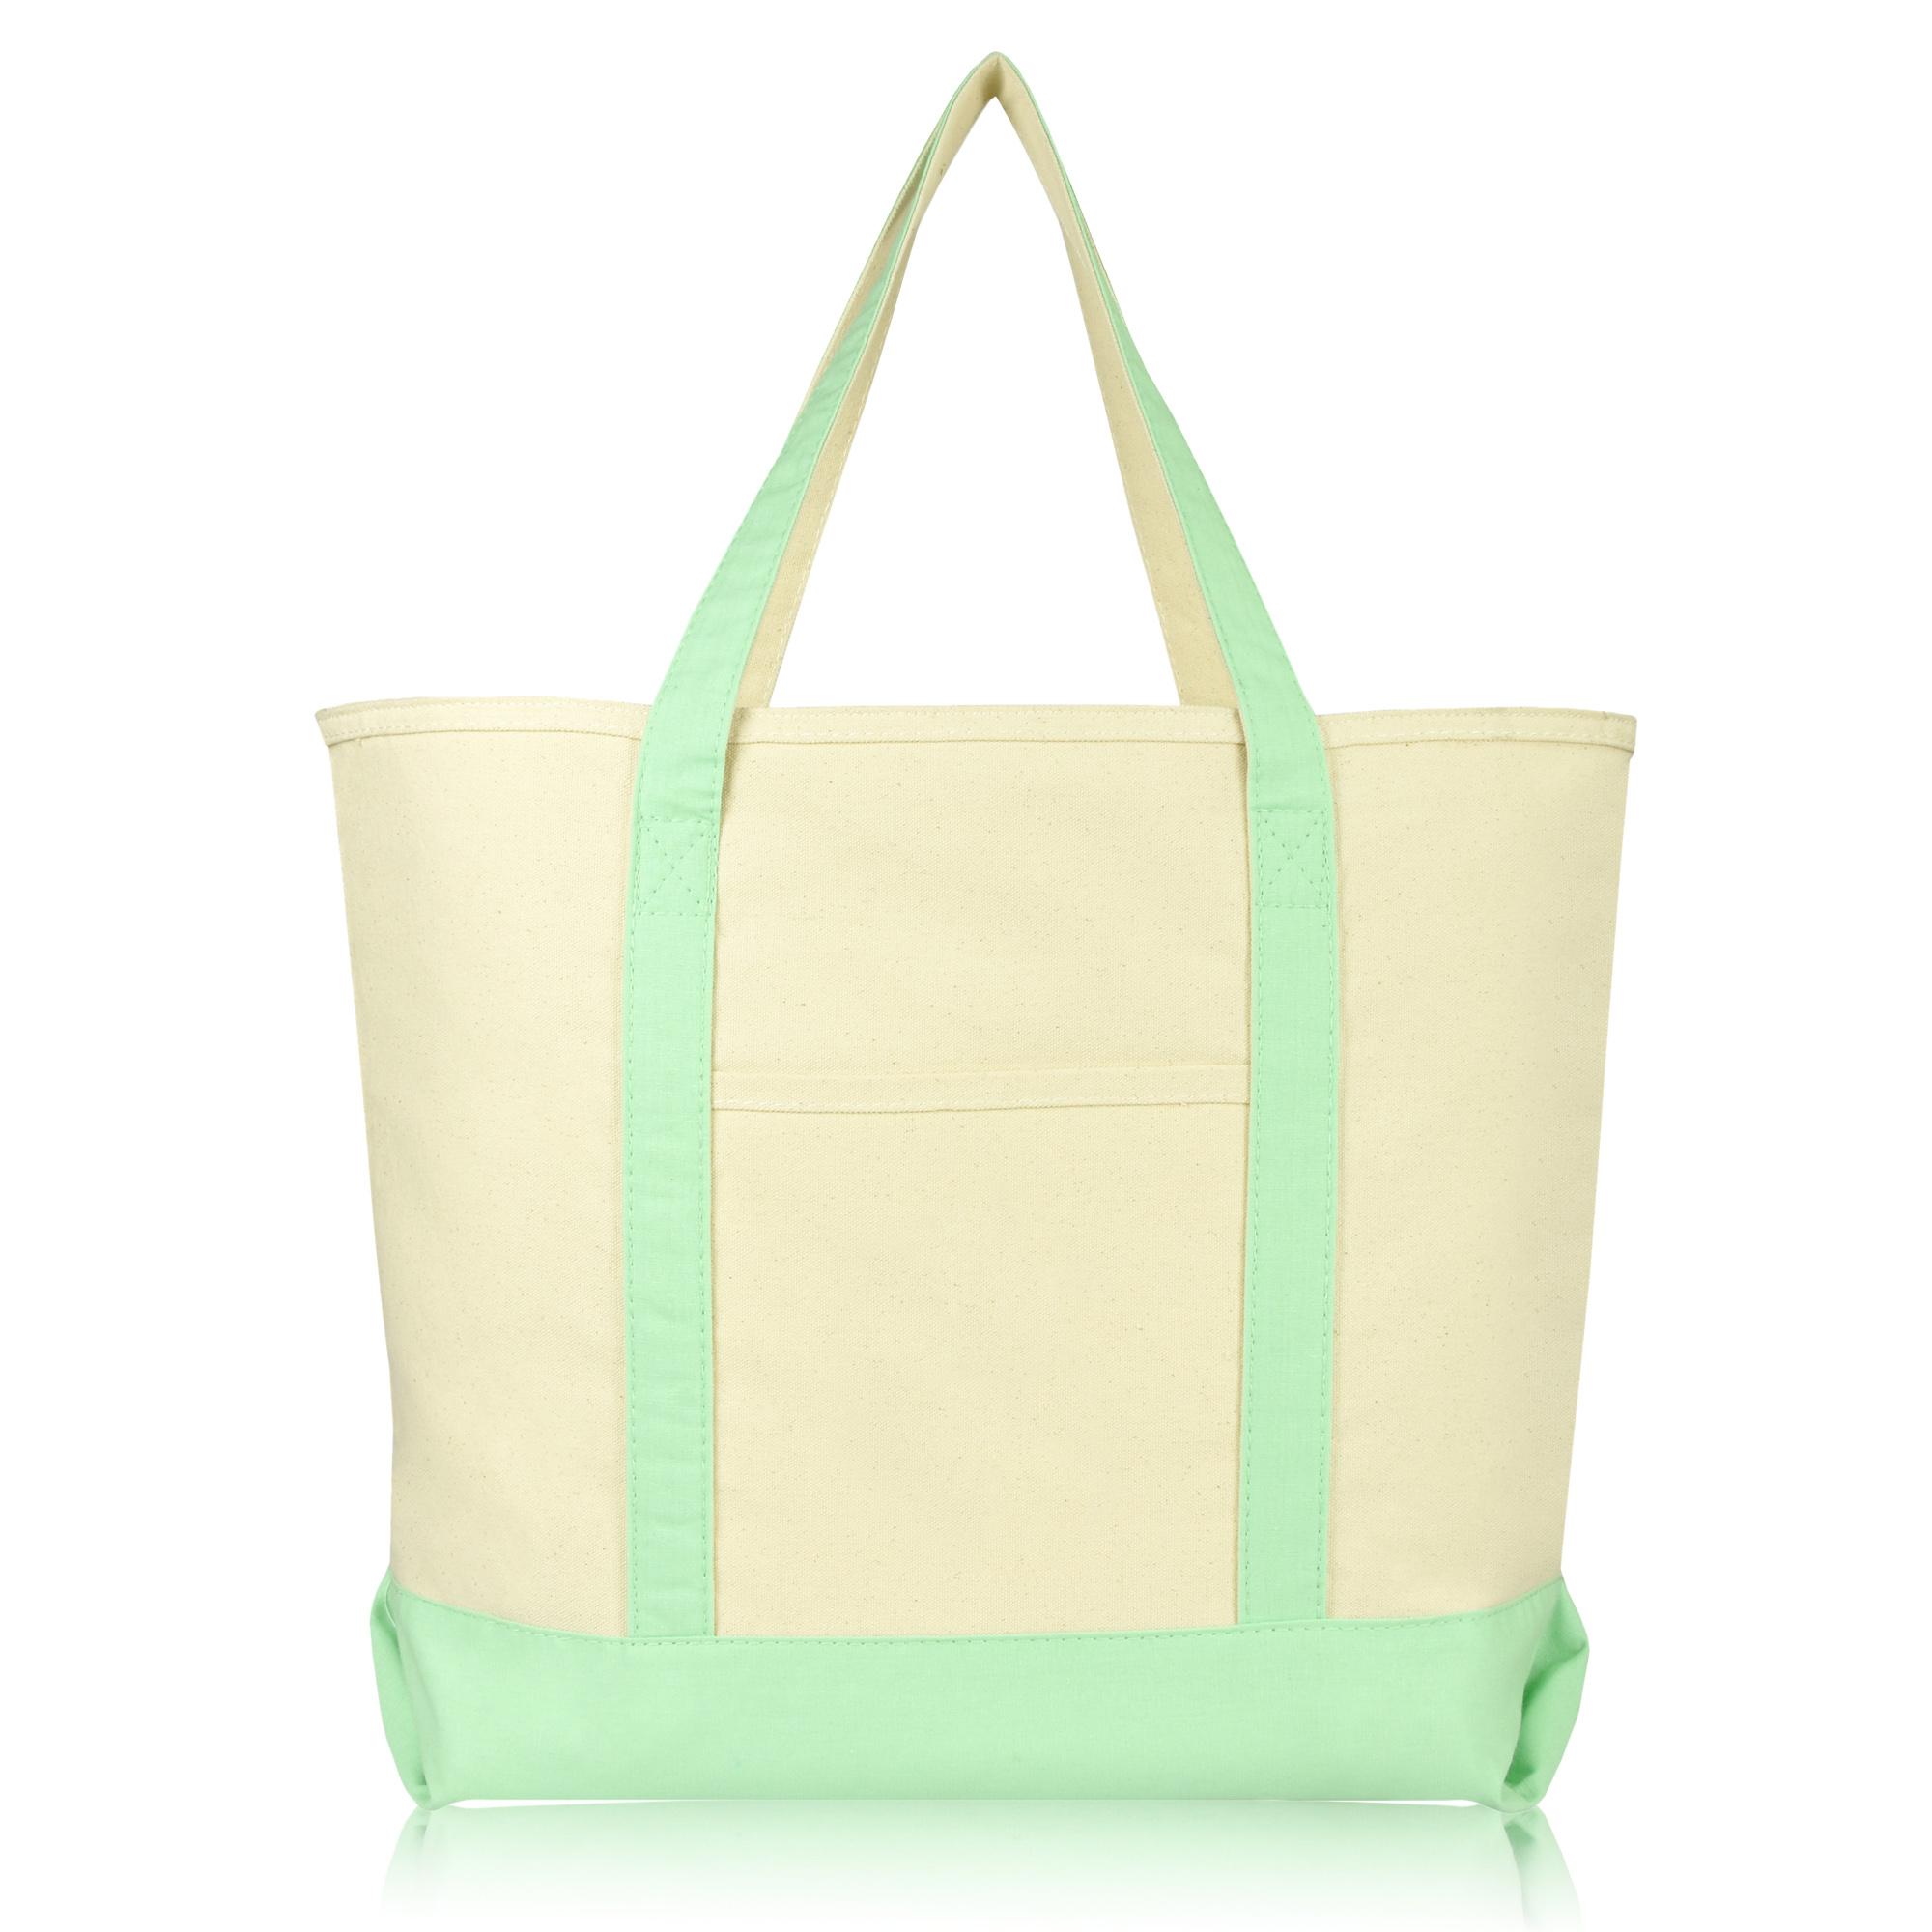 DALIX 22" Extra Large Cotton Canvas Zippered Shopping Tote Grocery Bag in Mint Green - image 1 of 6